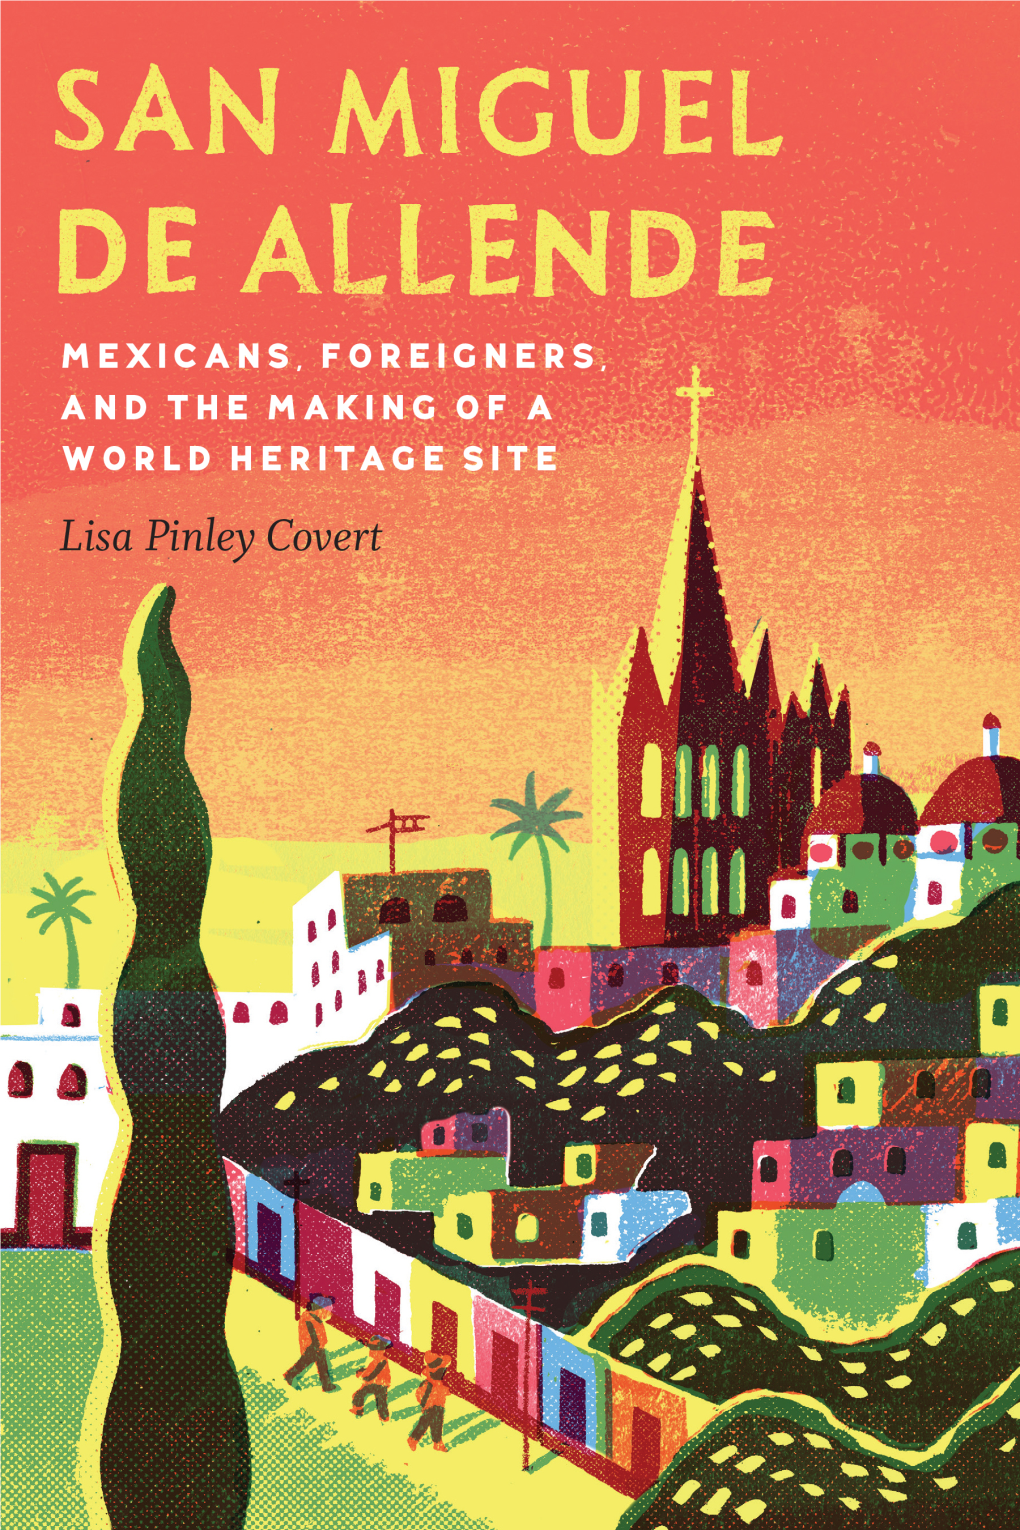 San Miguel De Allende: Mexicans, Foreigners, and the Making of a World Heritage Site / Lisa Pinley Covert